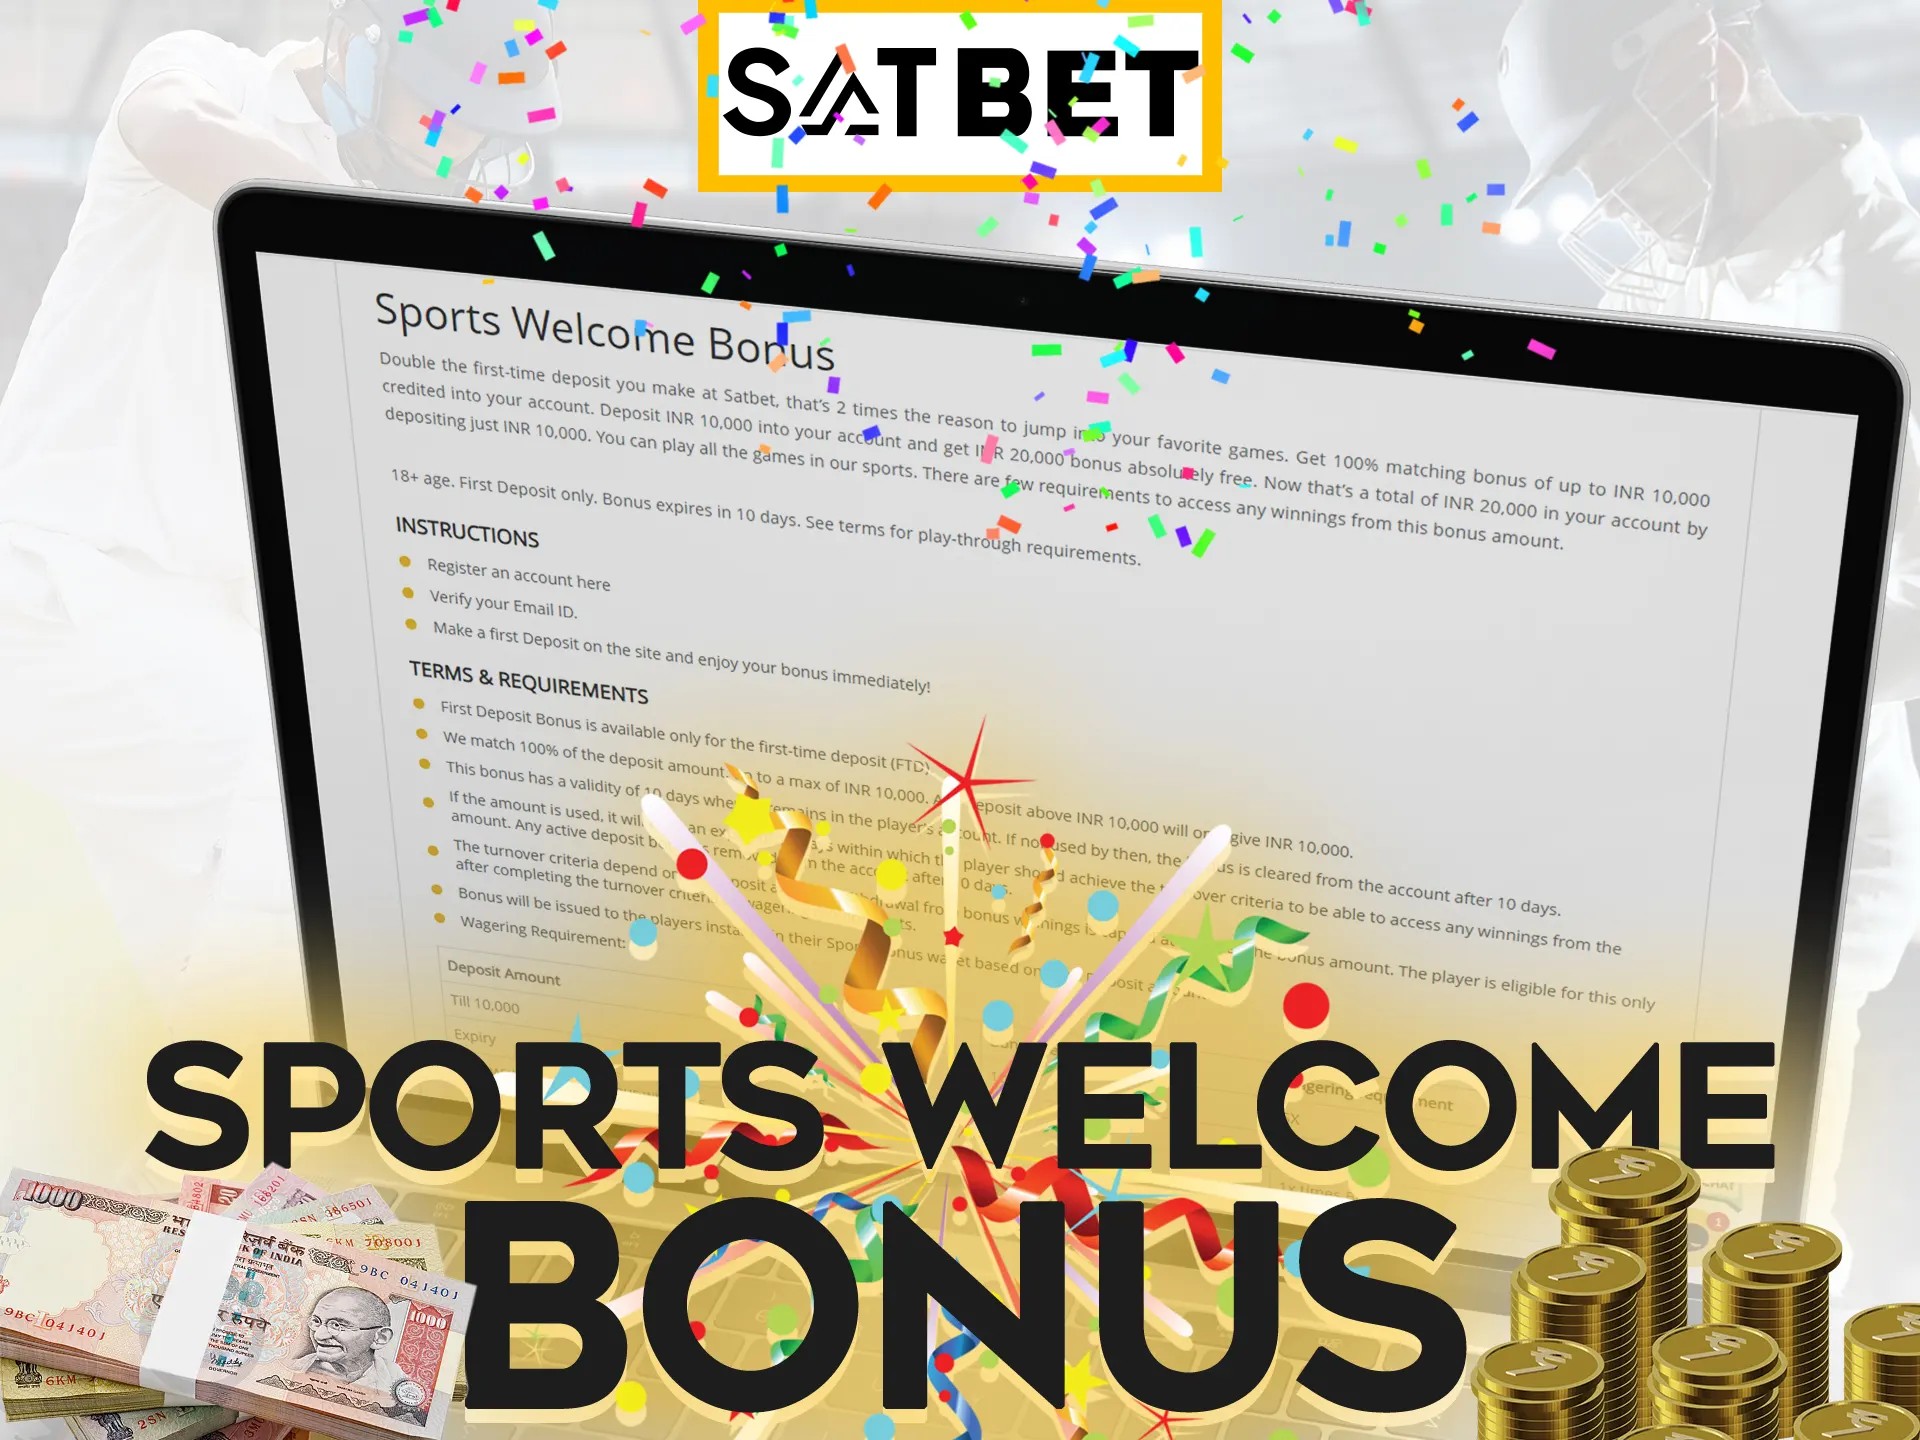 Claim your Satbet sports welcome bonus after making bets.